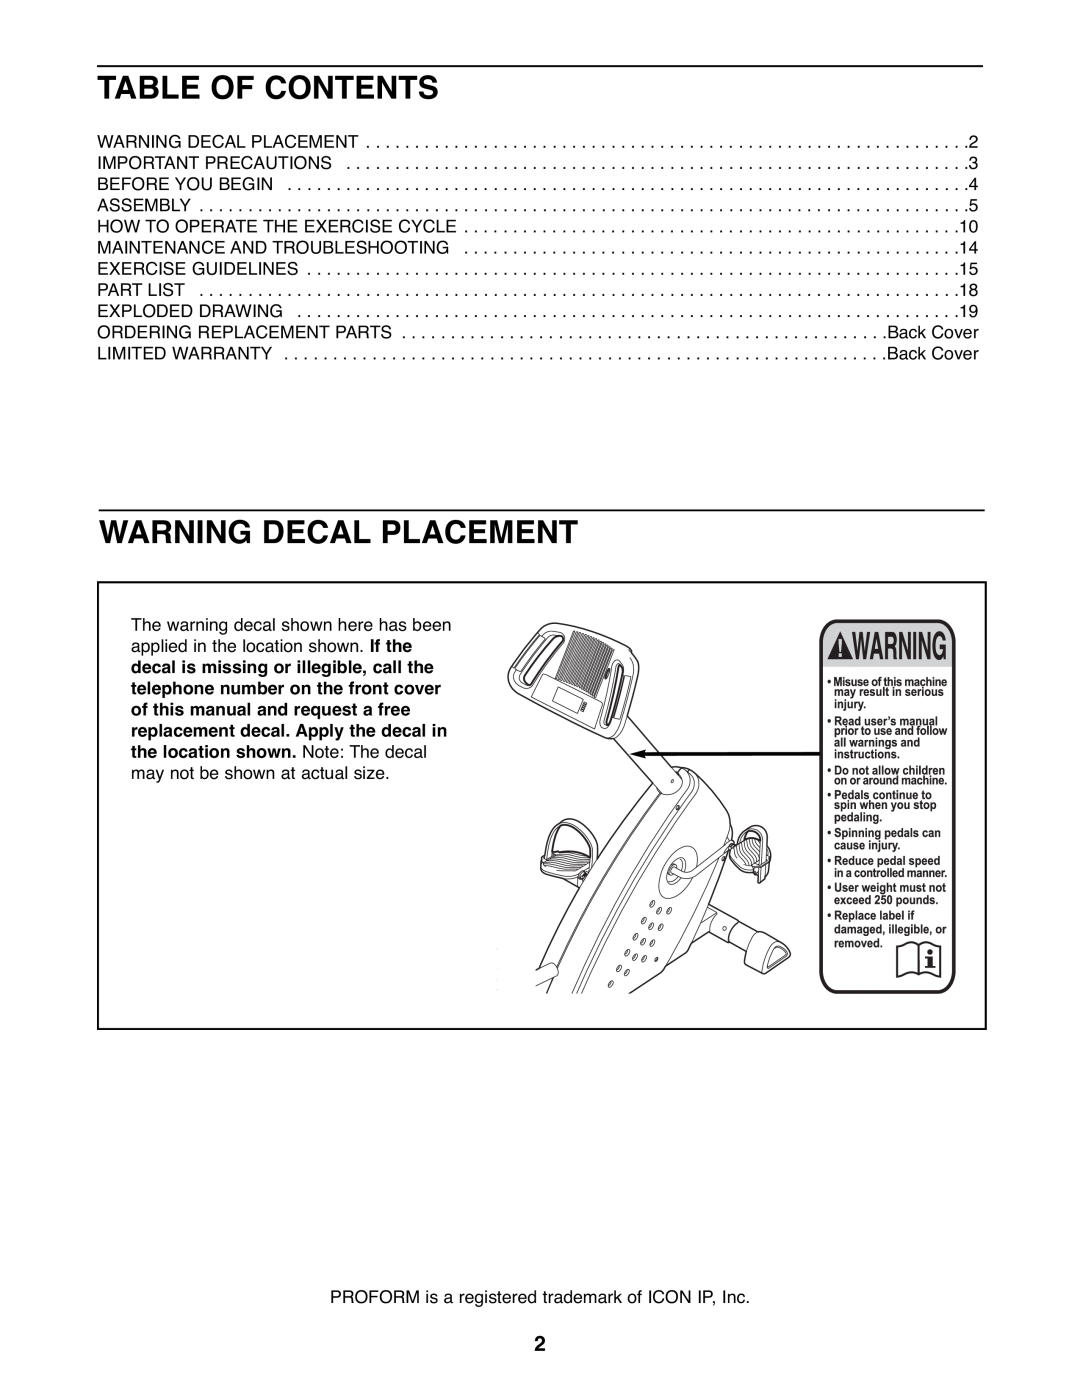 ProForm PFEX1995.1 Table Of Contents, Warning Decal Placement, PROFORM is a registered trademark of ICON IP, Inc 